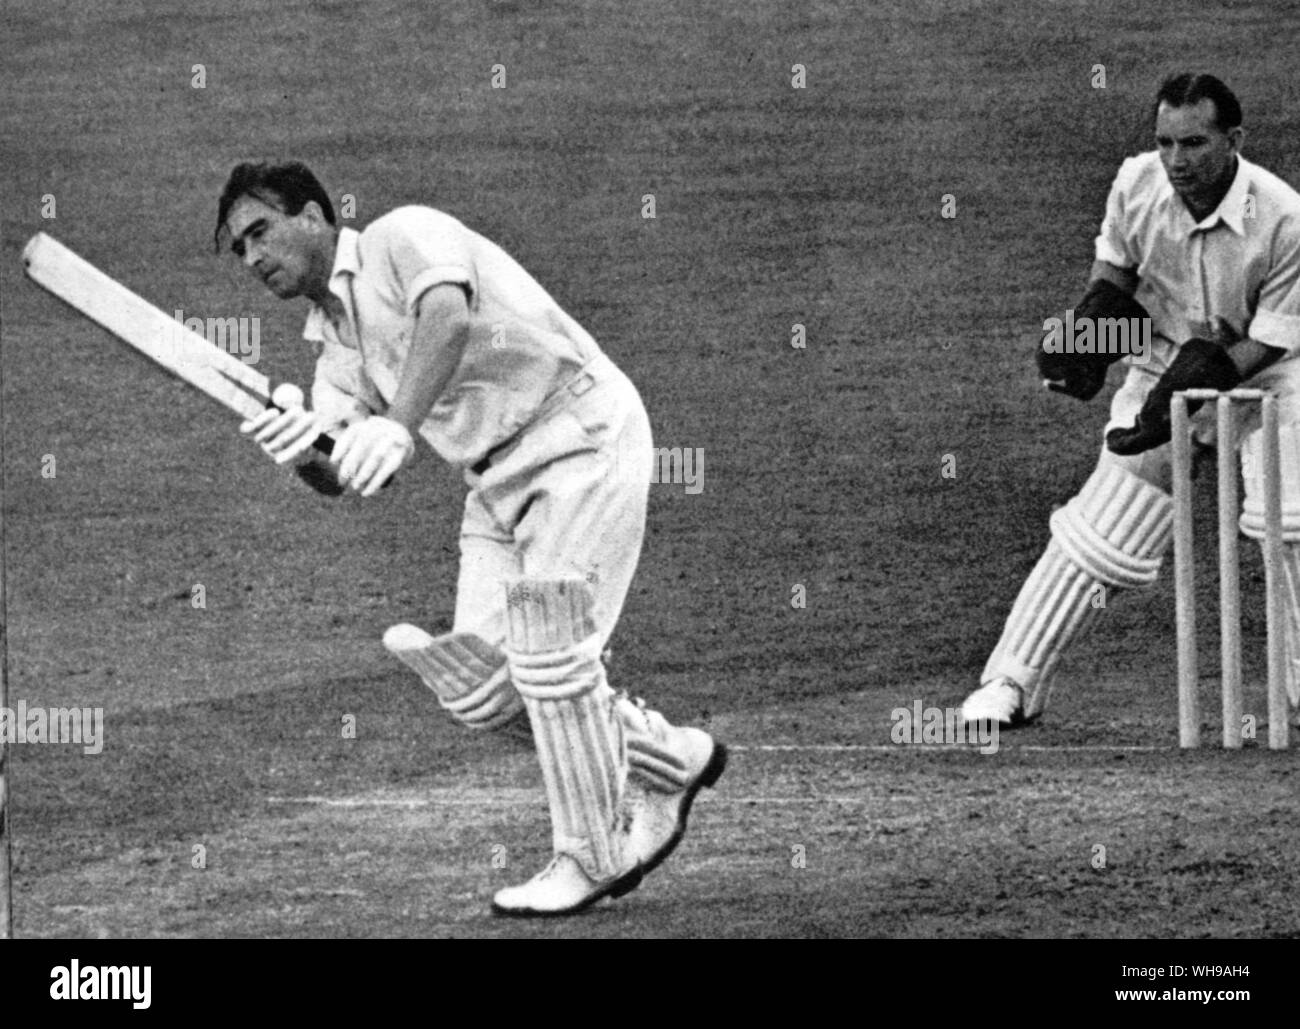 D C S Compton batting with A J McIntyre keeping wicket Stock Photo